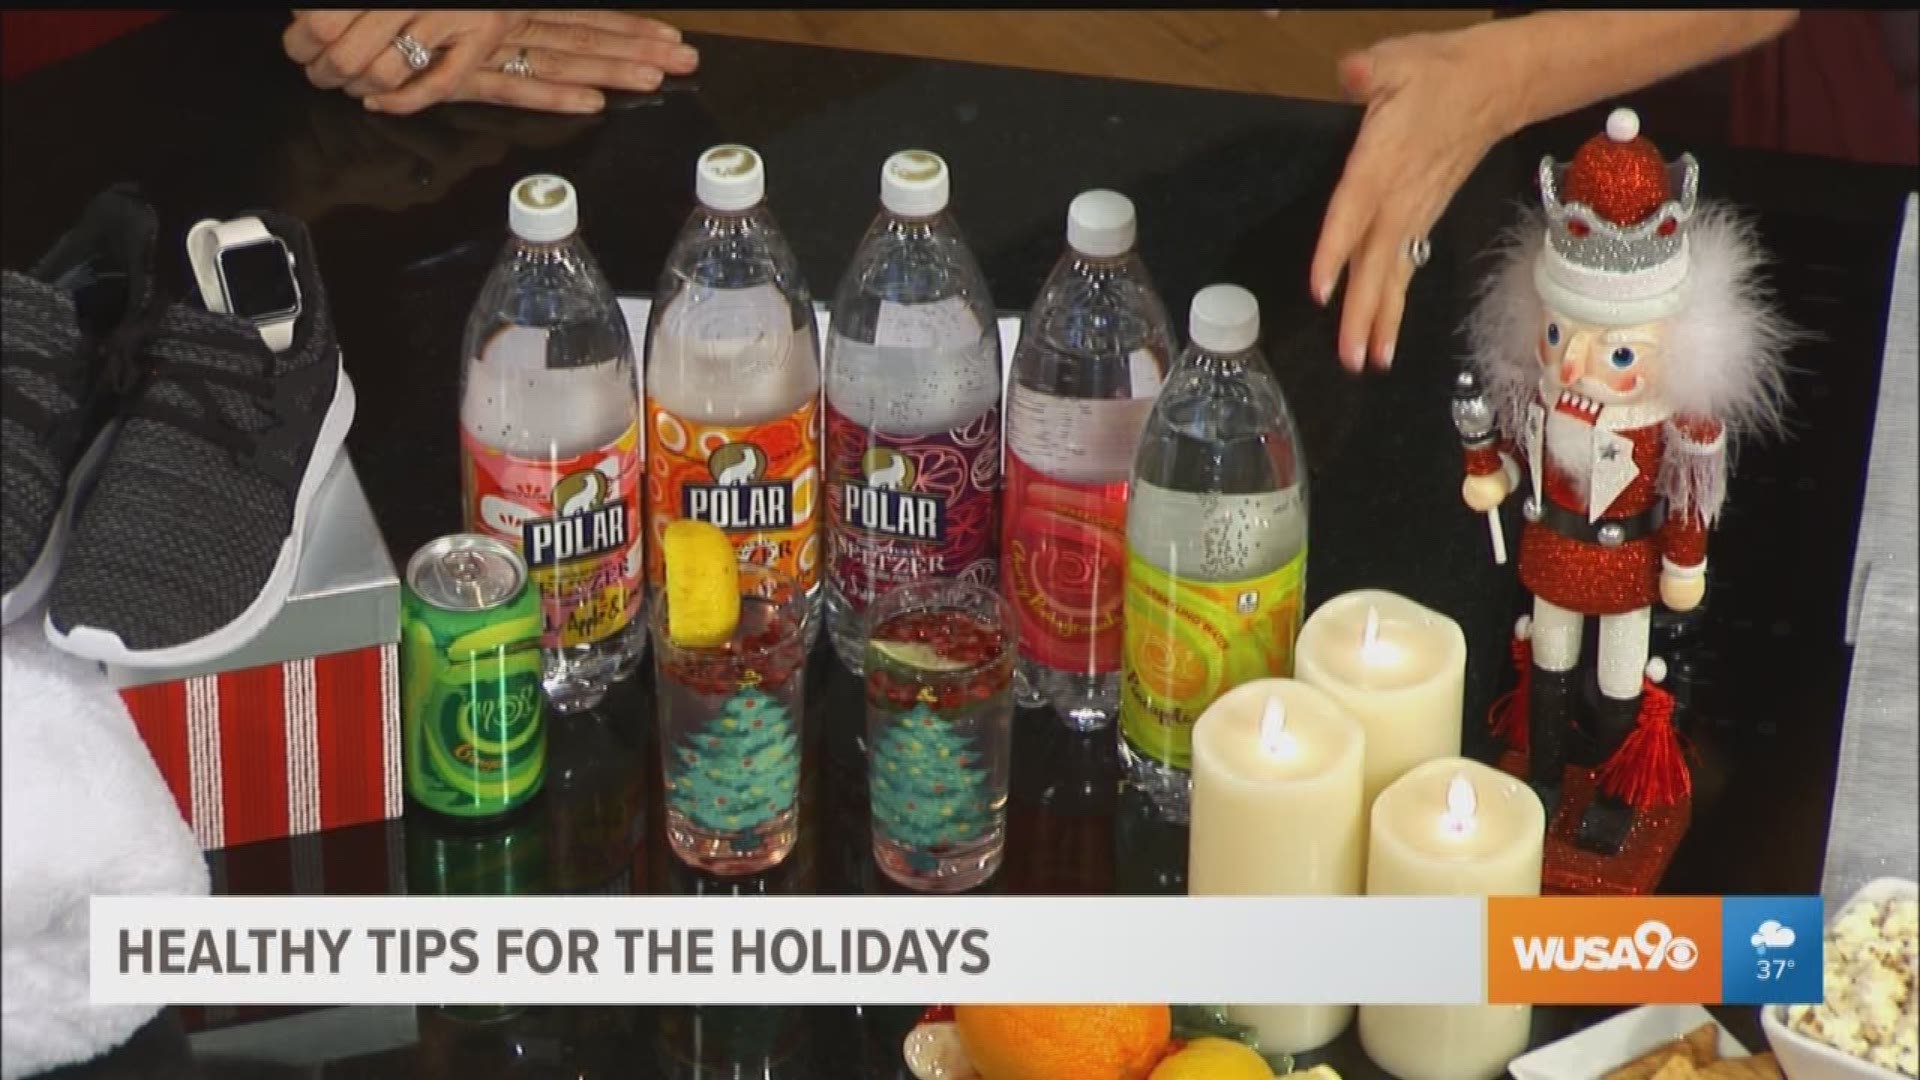 Jaime Coffey Martinez MS, RD, owner of Nutrition CPR provides healthy tips on how to stay on track during the holidays.